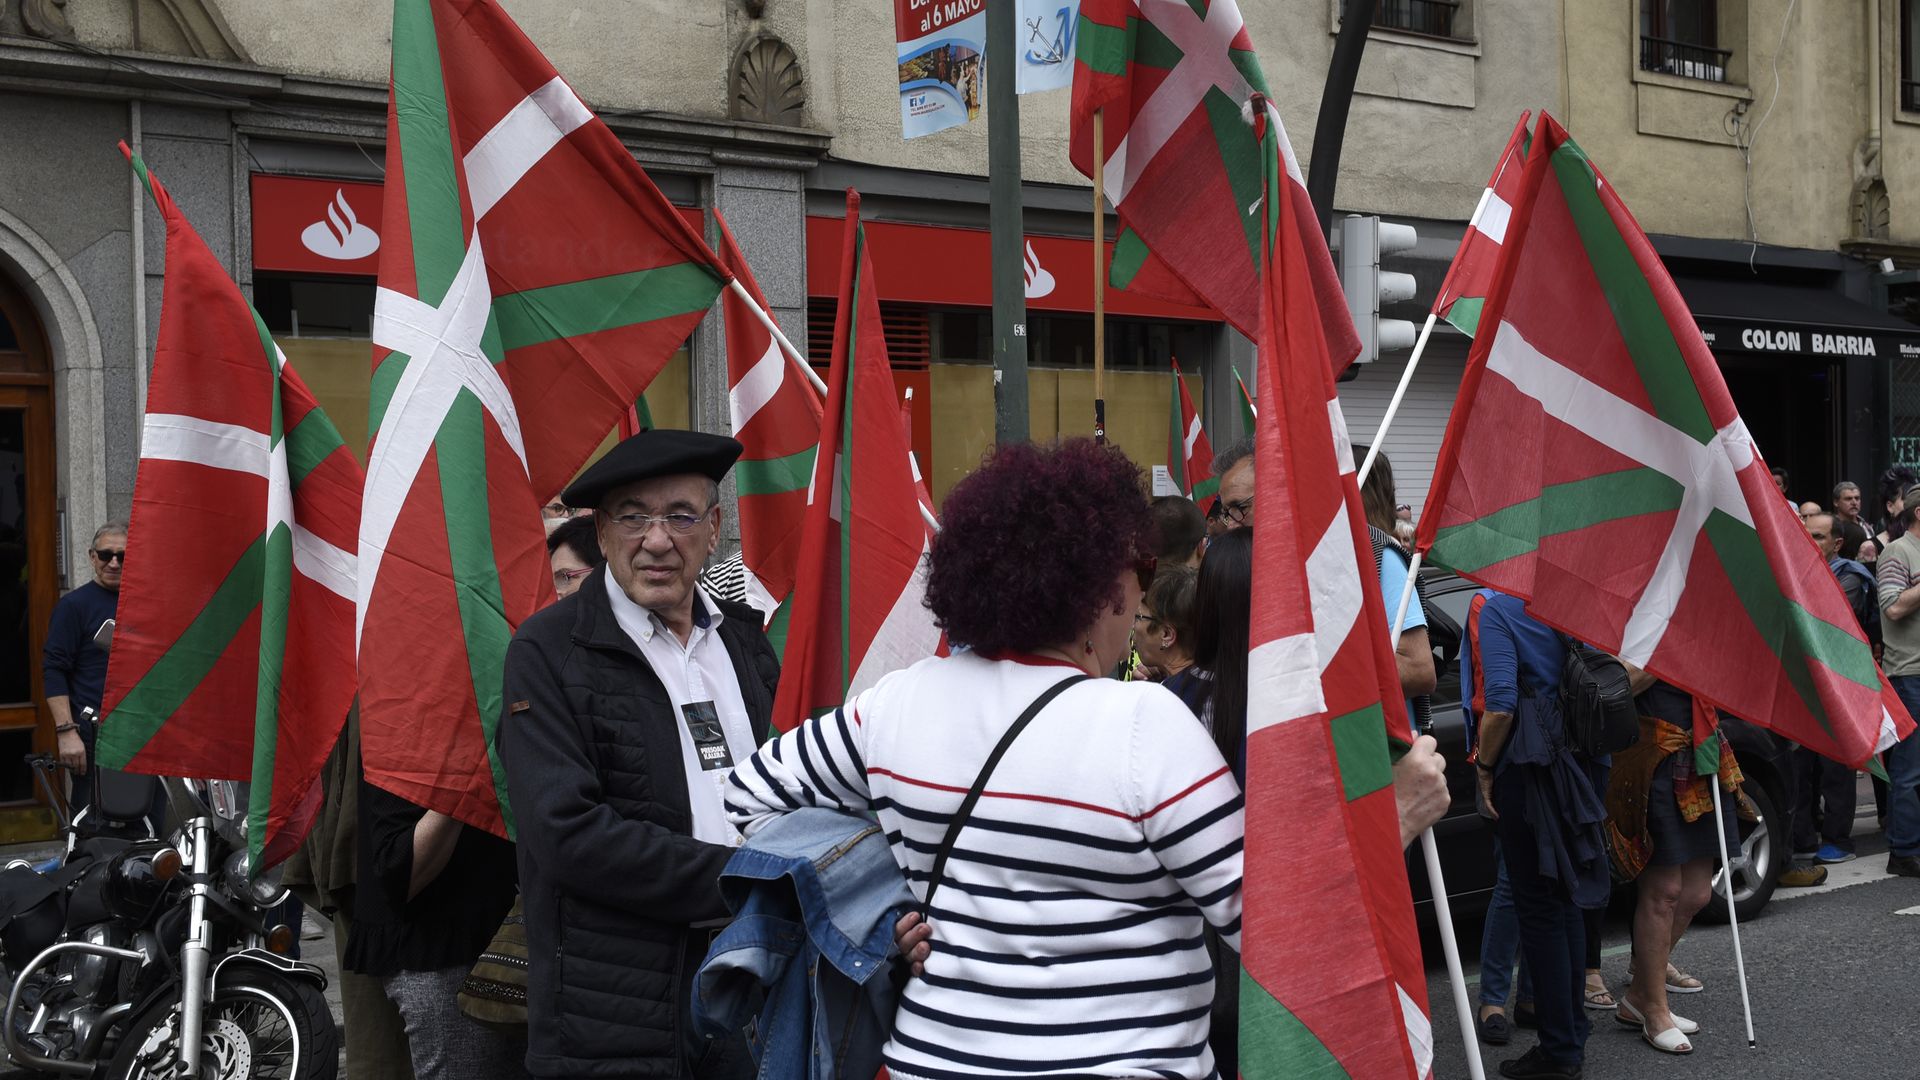 A group of basque separatism supporters rally in the city of Bilbao, northern Spain. Getty Images